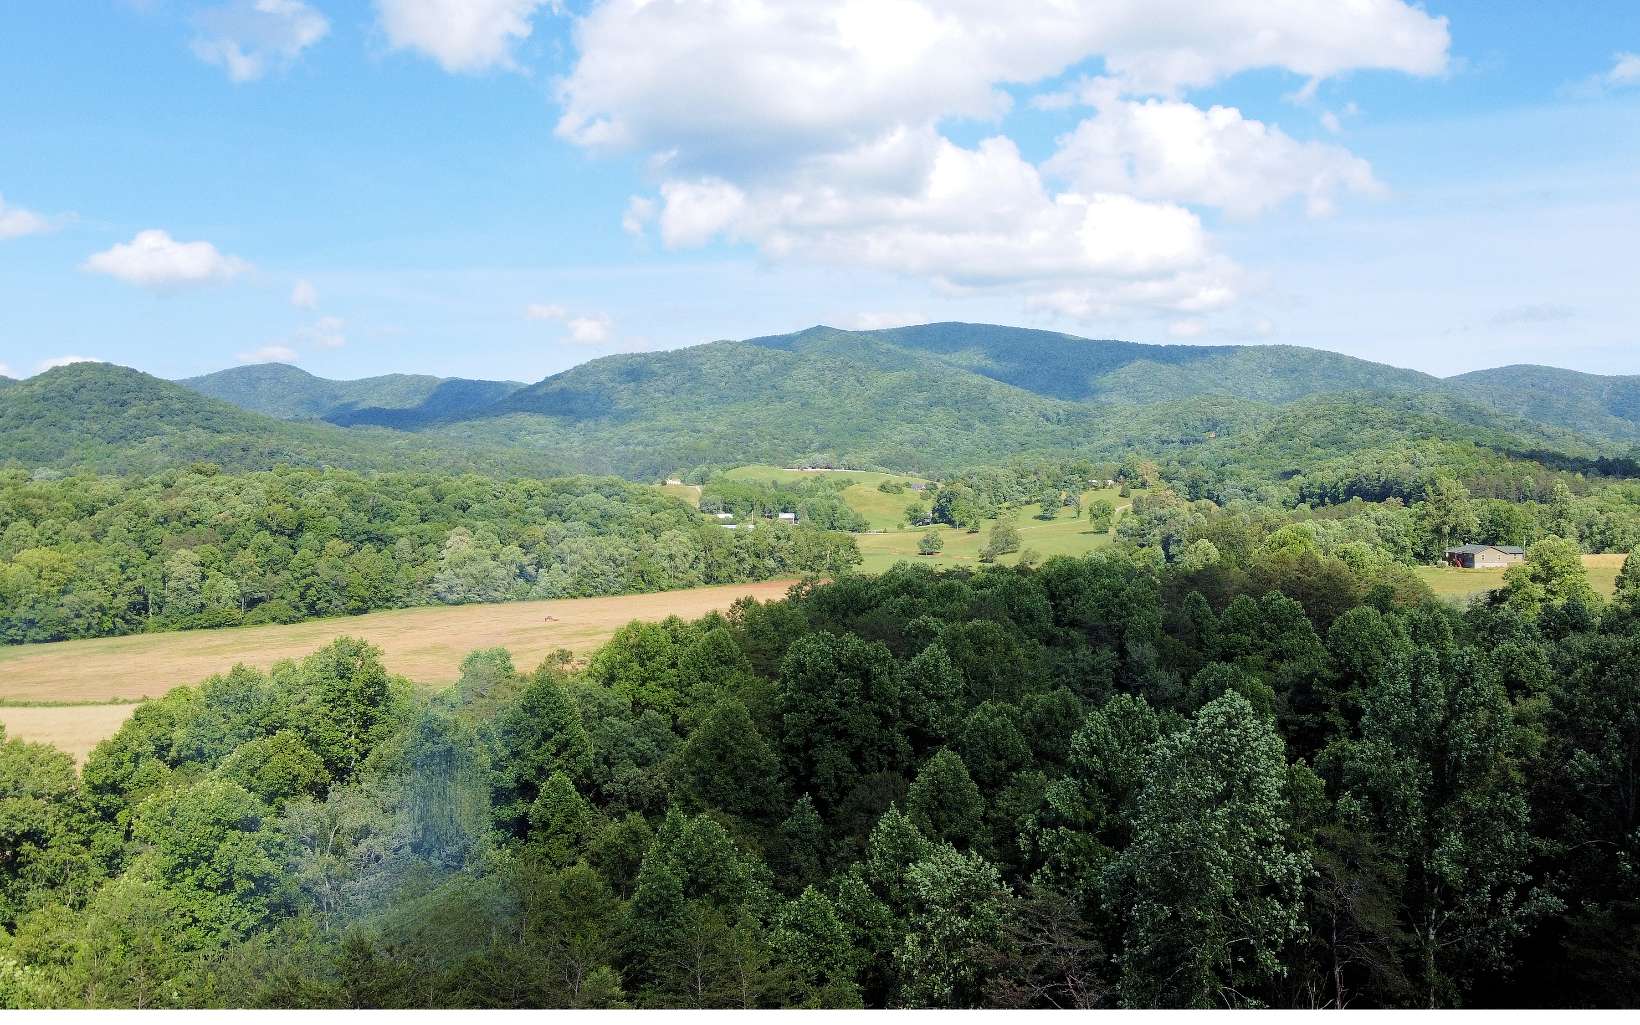 Location, location, location!! Approx. 2.8 acres!! Must watch the drone video! This incredible prime mountain view acreage will not last long! Ready to escape the big city and come to the tranquil North Ga mountains? This prime mountain acreage is located in Trackrock, Union county’s most sought after area and near Alexander's country store. This property is surrounded by pasture with long range mountain views for your mountain retreat. NO RESTRICTIONS (Except no farm animals and no junk cars allowed) and No steep climb for these mountain views! Perk testing already completed and shows where you can build your mountain home and clearing has been done! Gentle laying partially wooded acreage in excellent location. Owner is a licensed agent.